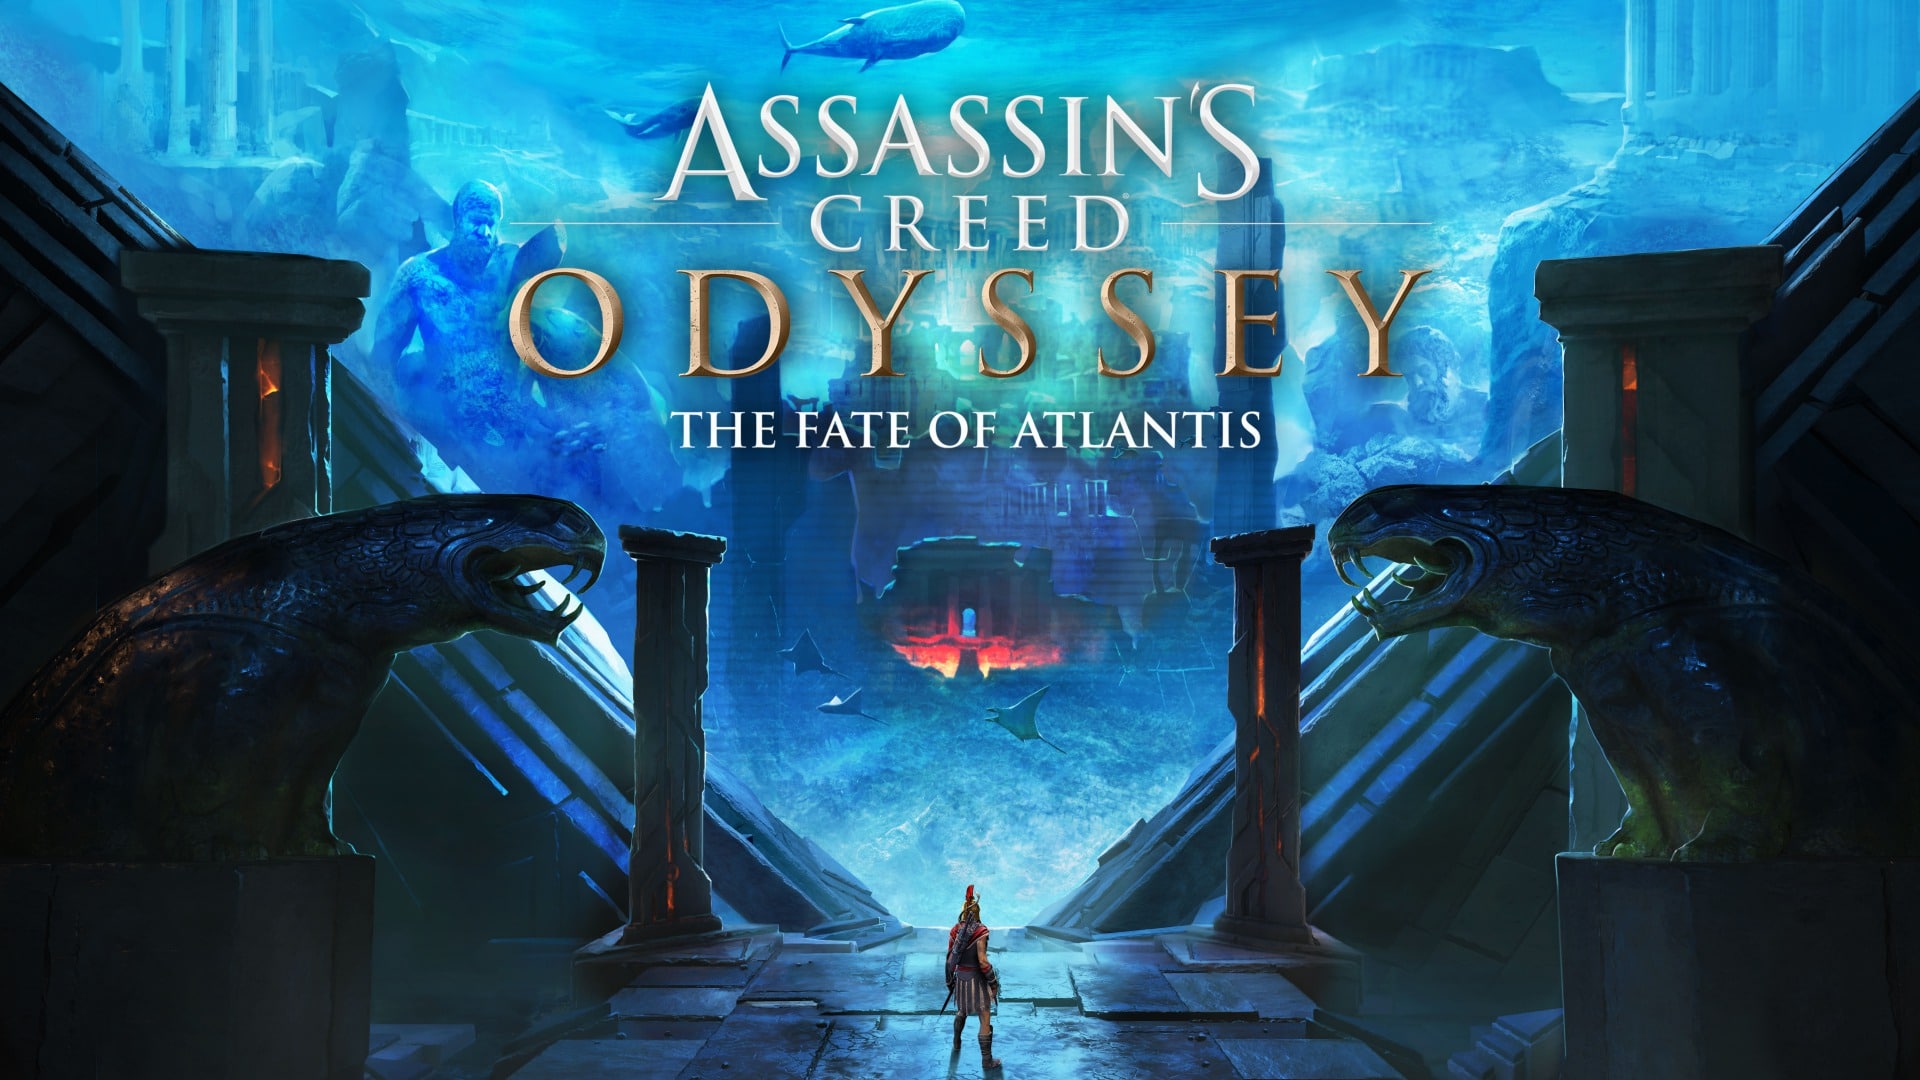 ASSASSIN’S CREED® ODYSSEY THE FATE OF ATLANTIS, GamersRD